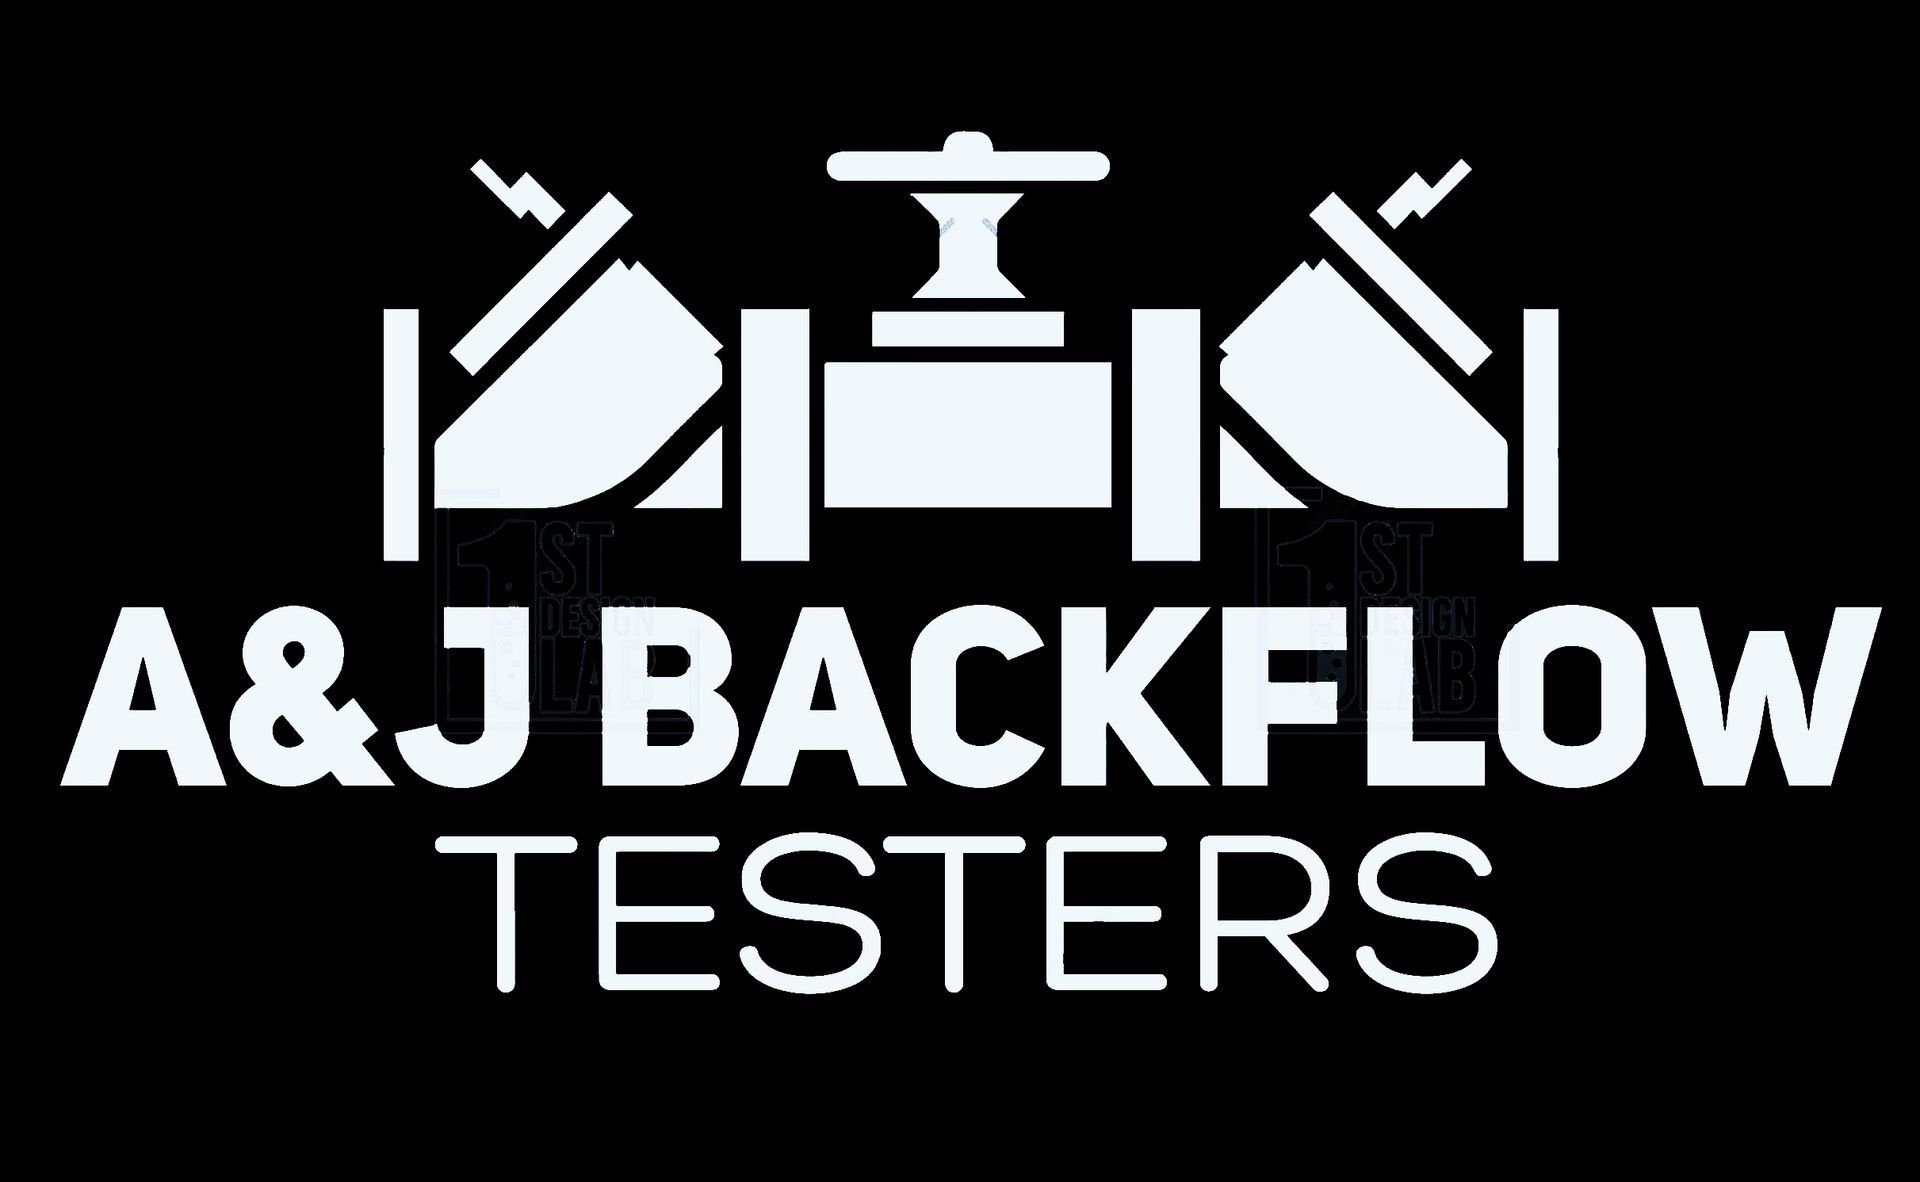 a-and-j-backflow-testers-logo